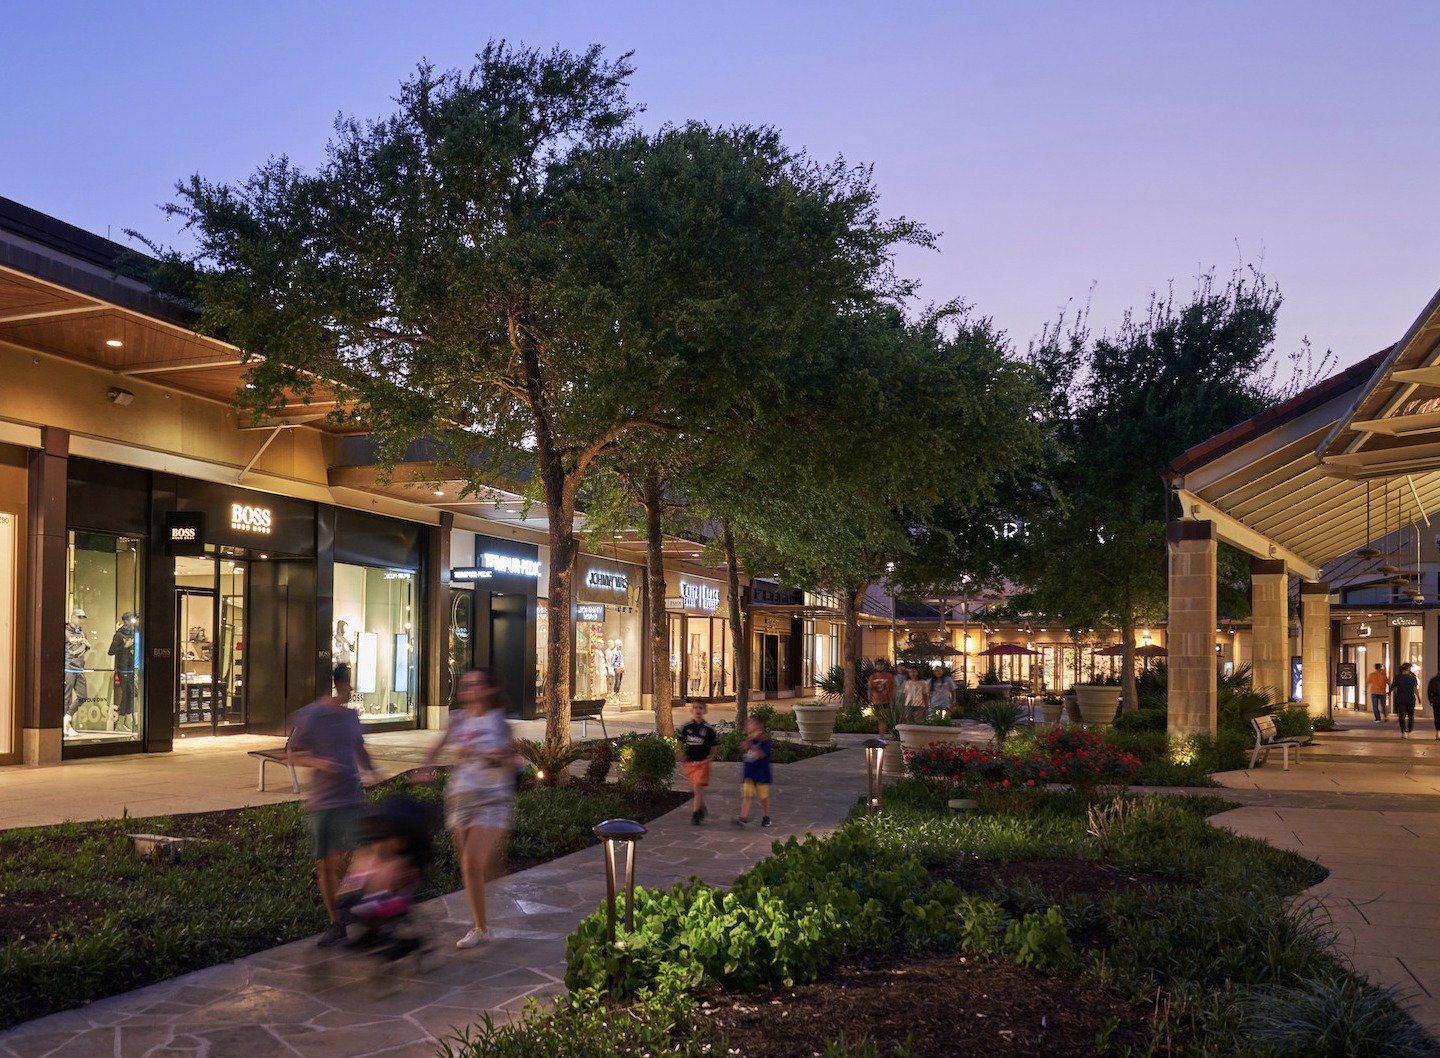 Lifestyle centers are leaders in the retail landscape, offering the perfect blend of an experiential and open-air environment. Don't just take our word for it. Take it from @icsc when they say that lifestyle centers are &ldquo;winning&rdquo;. From di